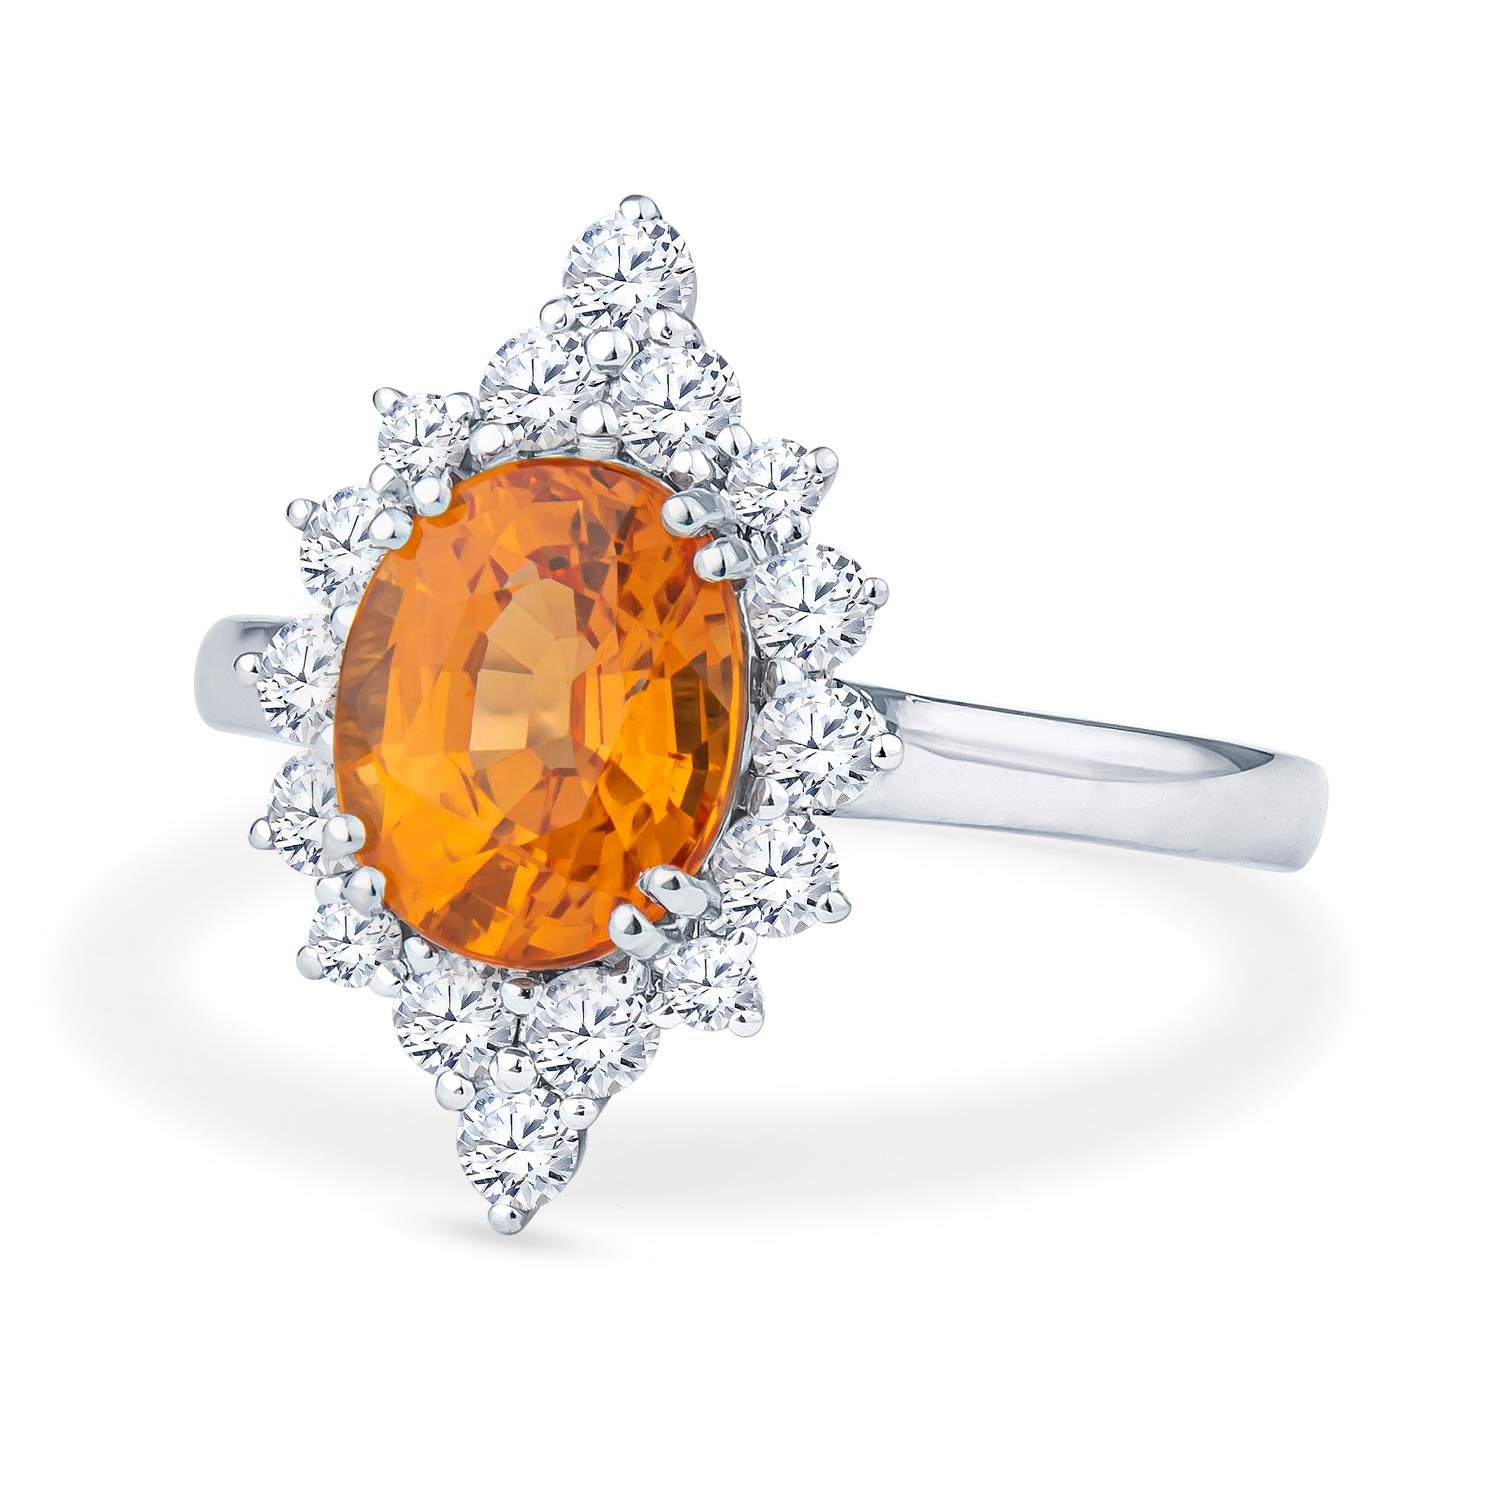 This eye-catching 2.68ct natural oval Spessartine Garnet is a bold orange shade, sure to be noticed by everyone. This ring is complemented with several natural round diamonds surrounding it, weighing a total of 0.55 carats. The stones are set in a